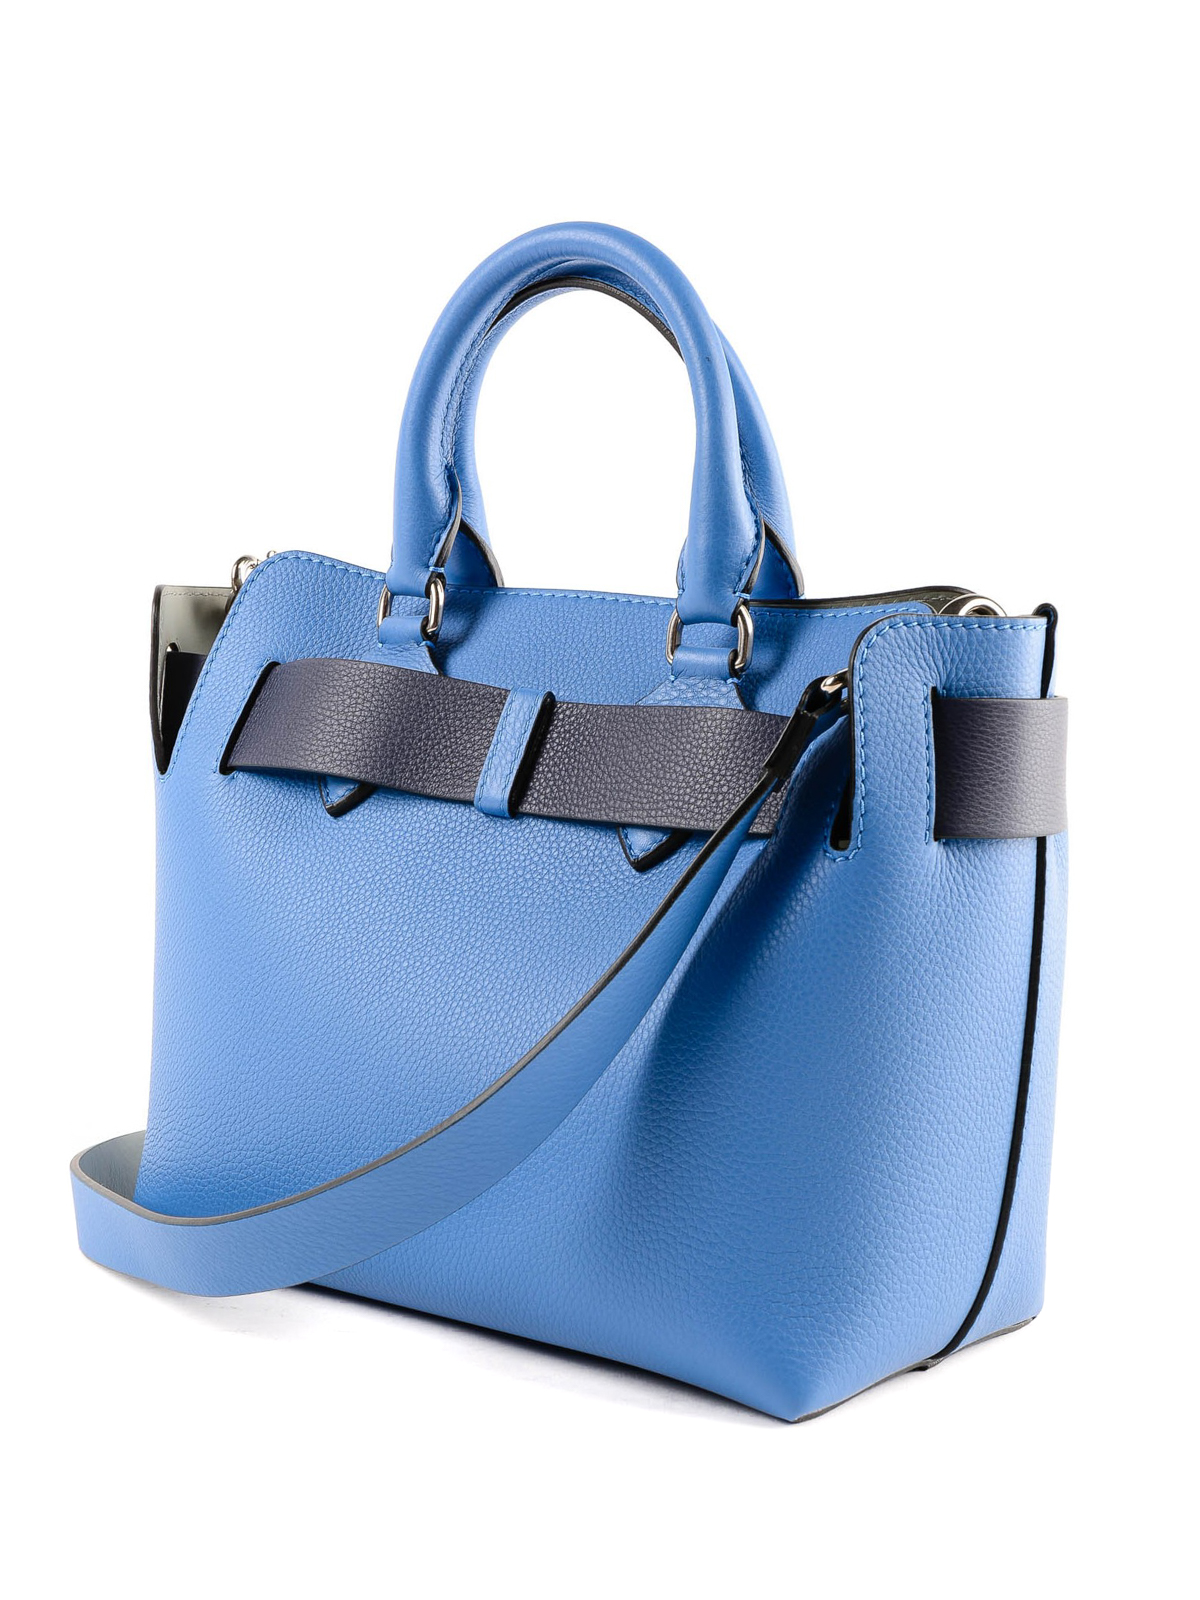 Burberry Blue/White Pebbled Leather Small Belt Bag